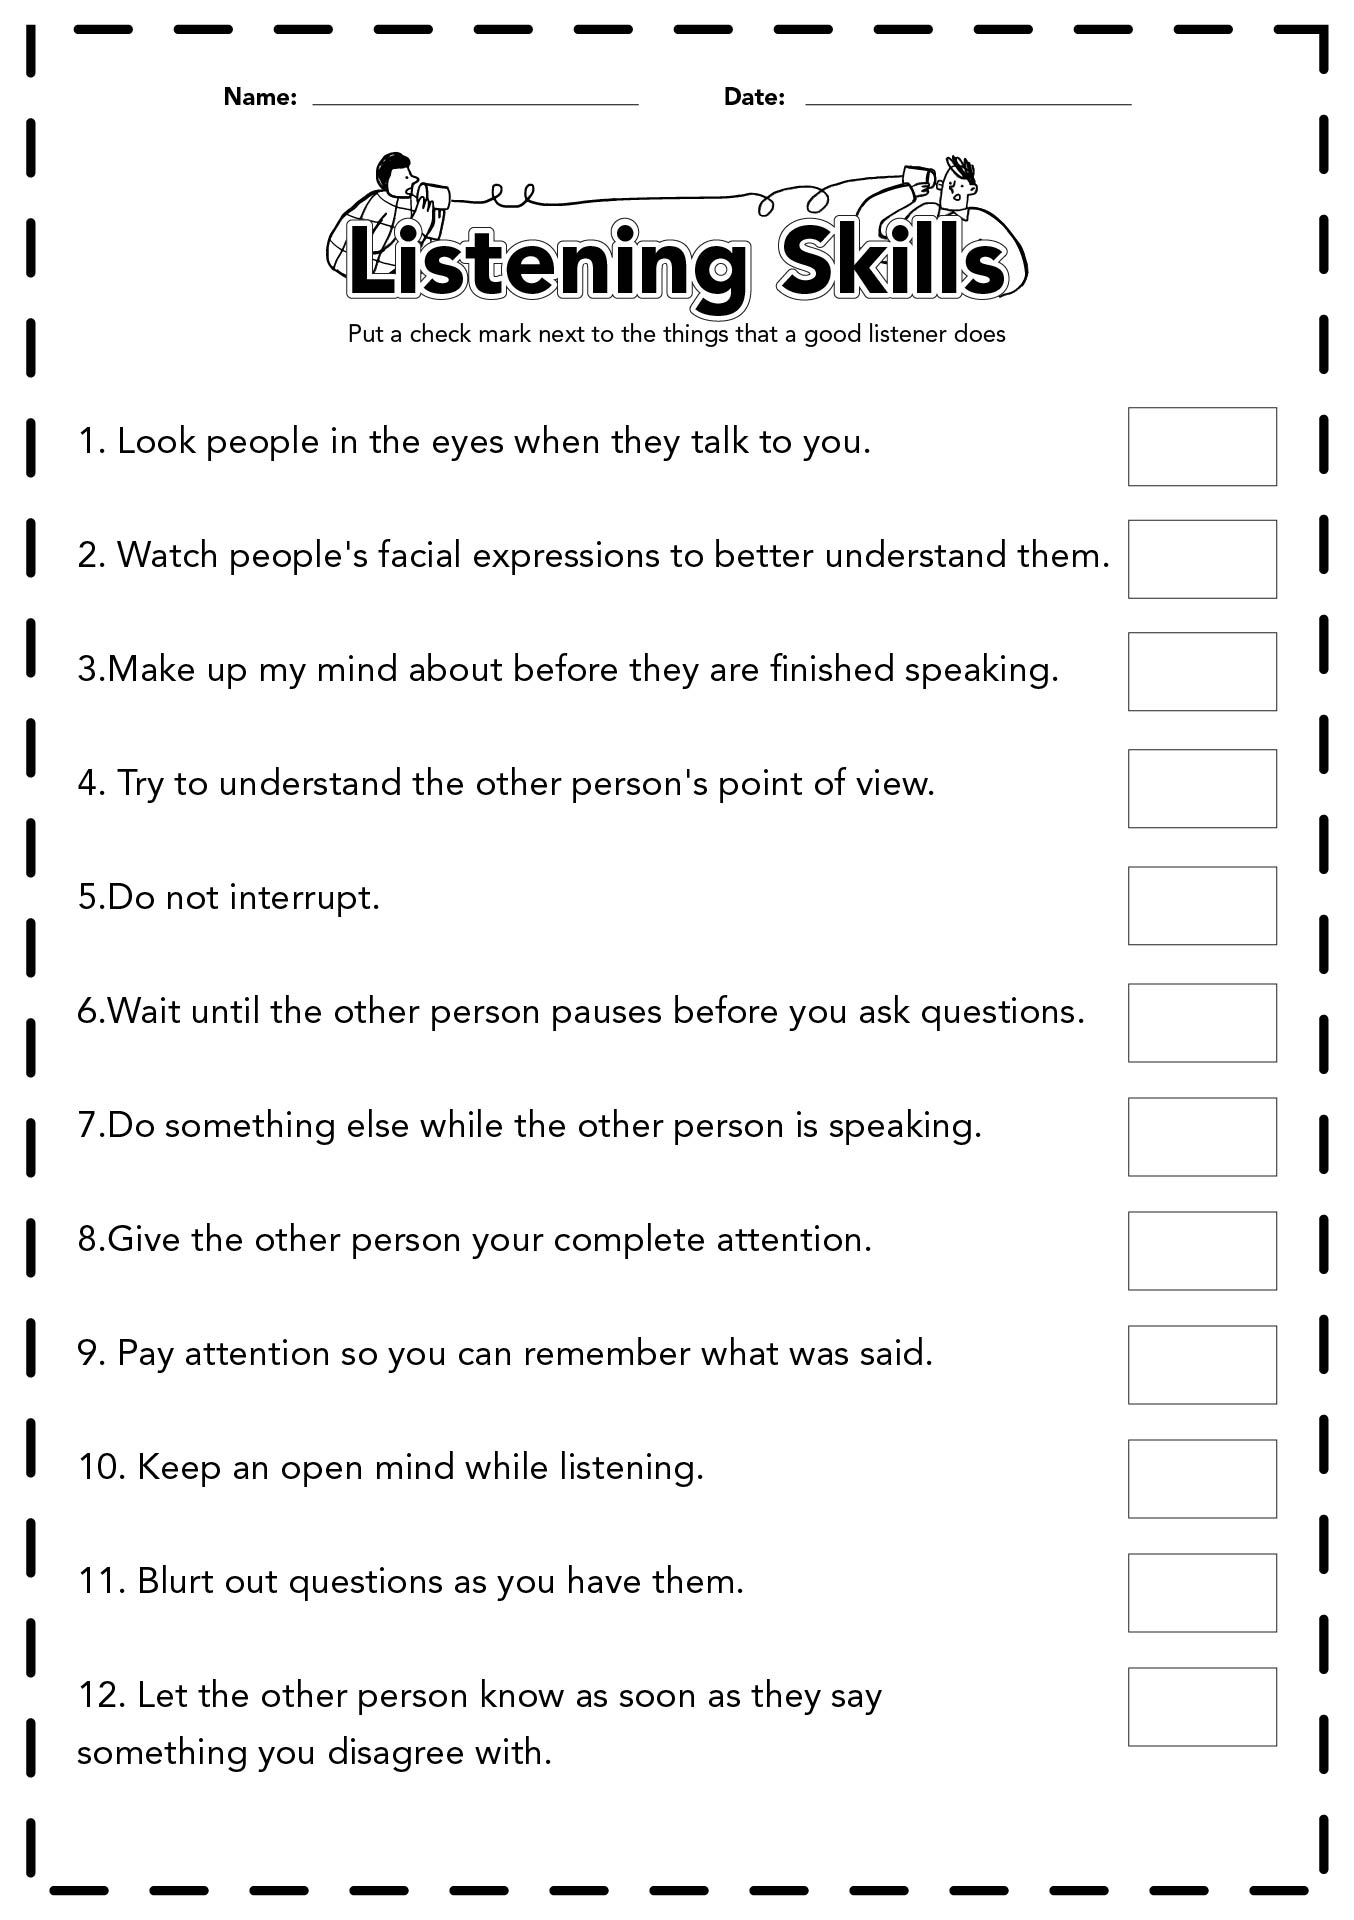 Active Listening Worksheets for Workplace